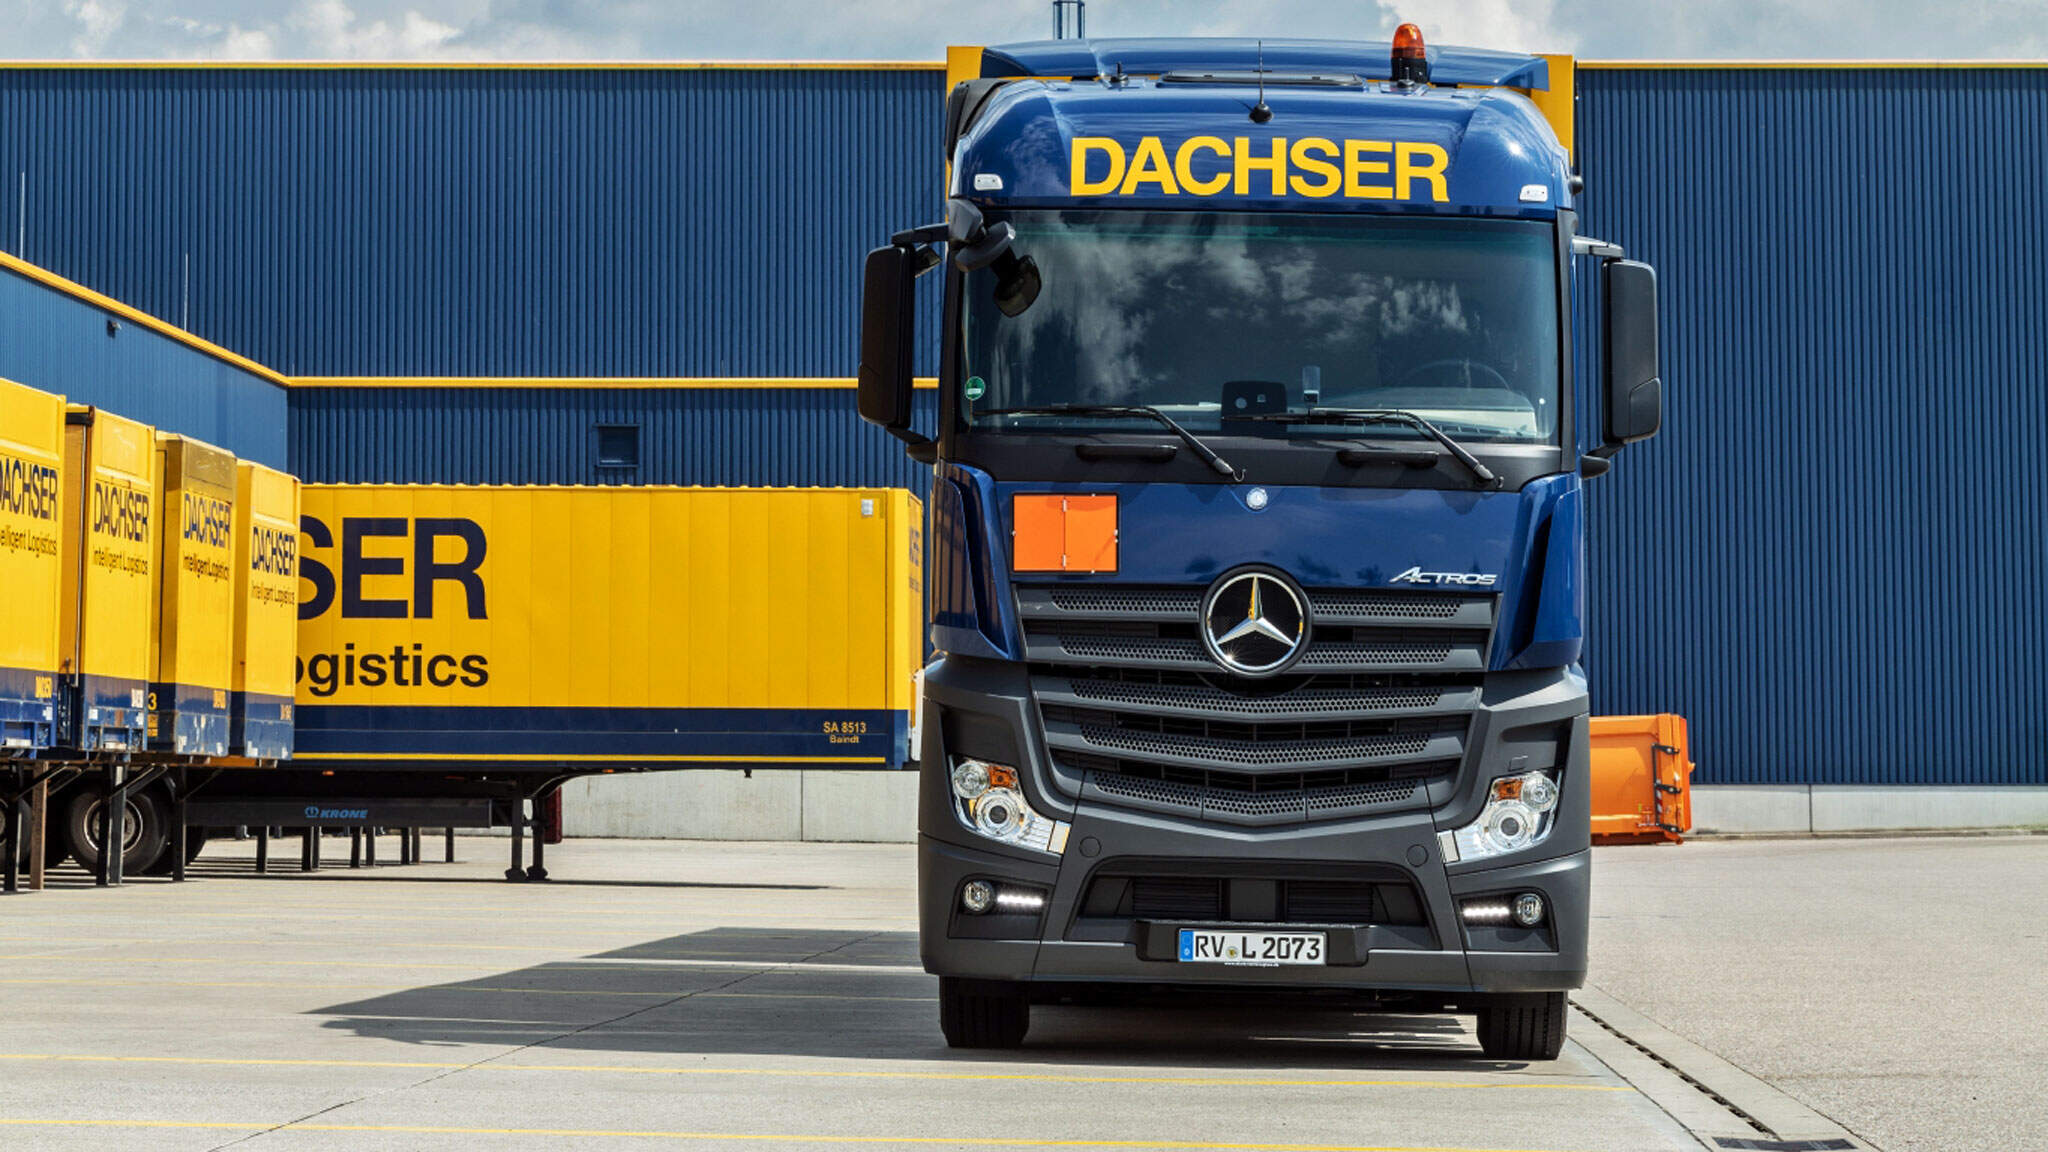 Safety is always the top priority for all DACHSER services